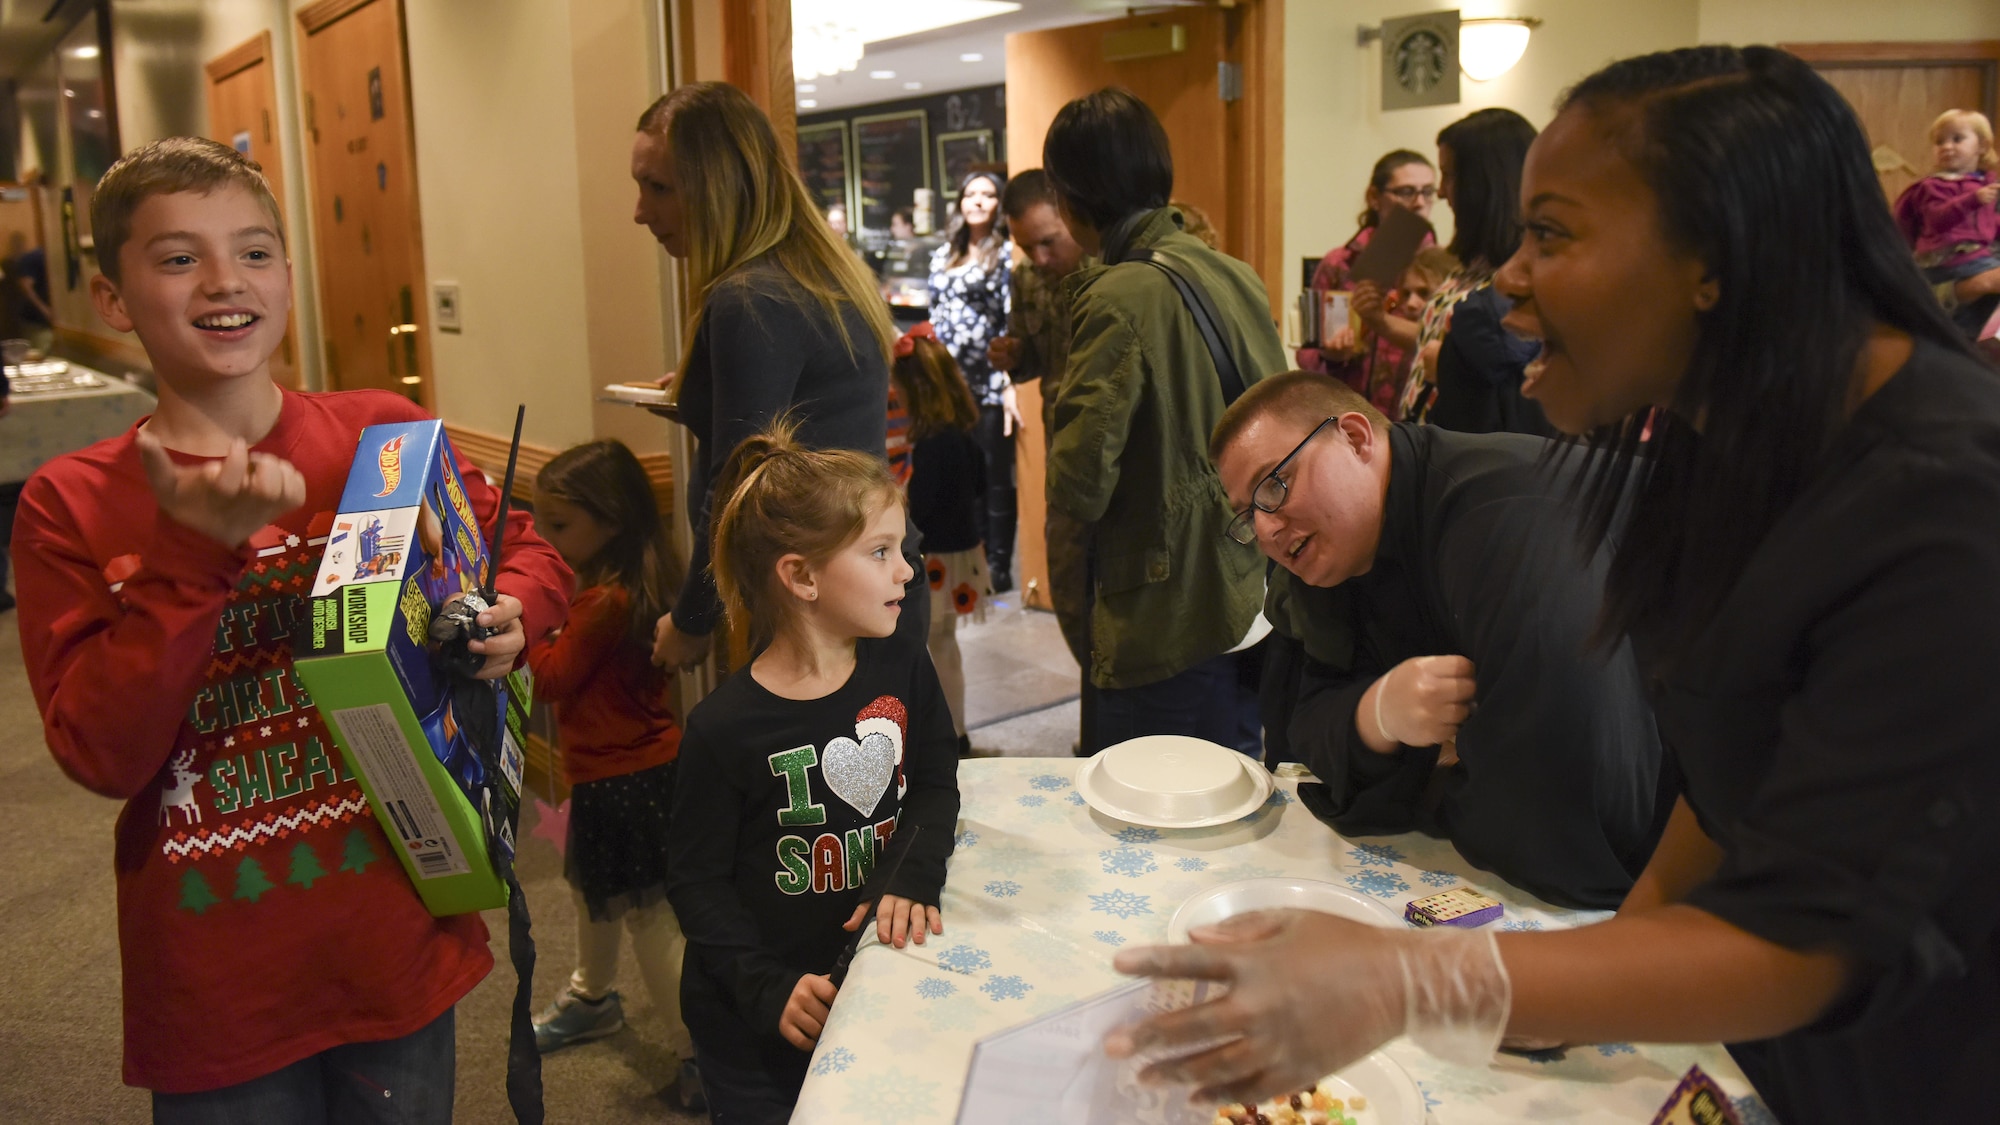 A young Team Whiteman member, outer left, tries a booger-flavored jelly bean during the annual tree lighting event
at Whiteman Air Force Base, Mo., Nov. 29, 2016. In addition to the candy, volunteers set up different wizard-themed
activities to help make the night magical.